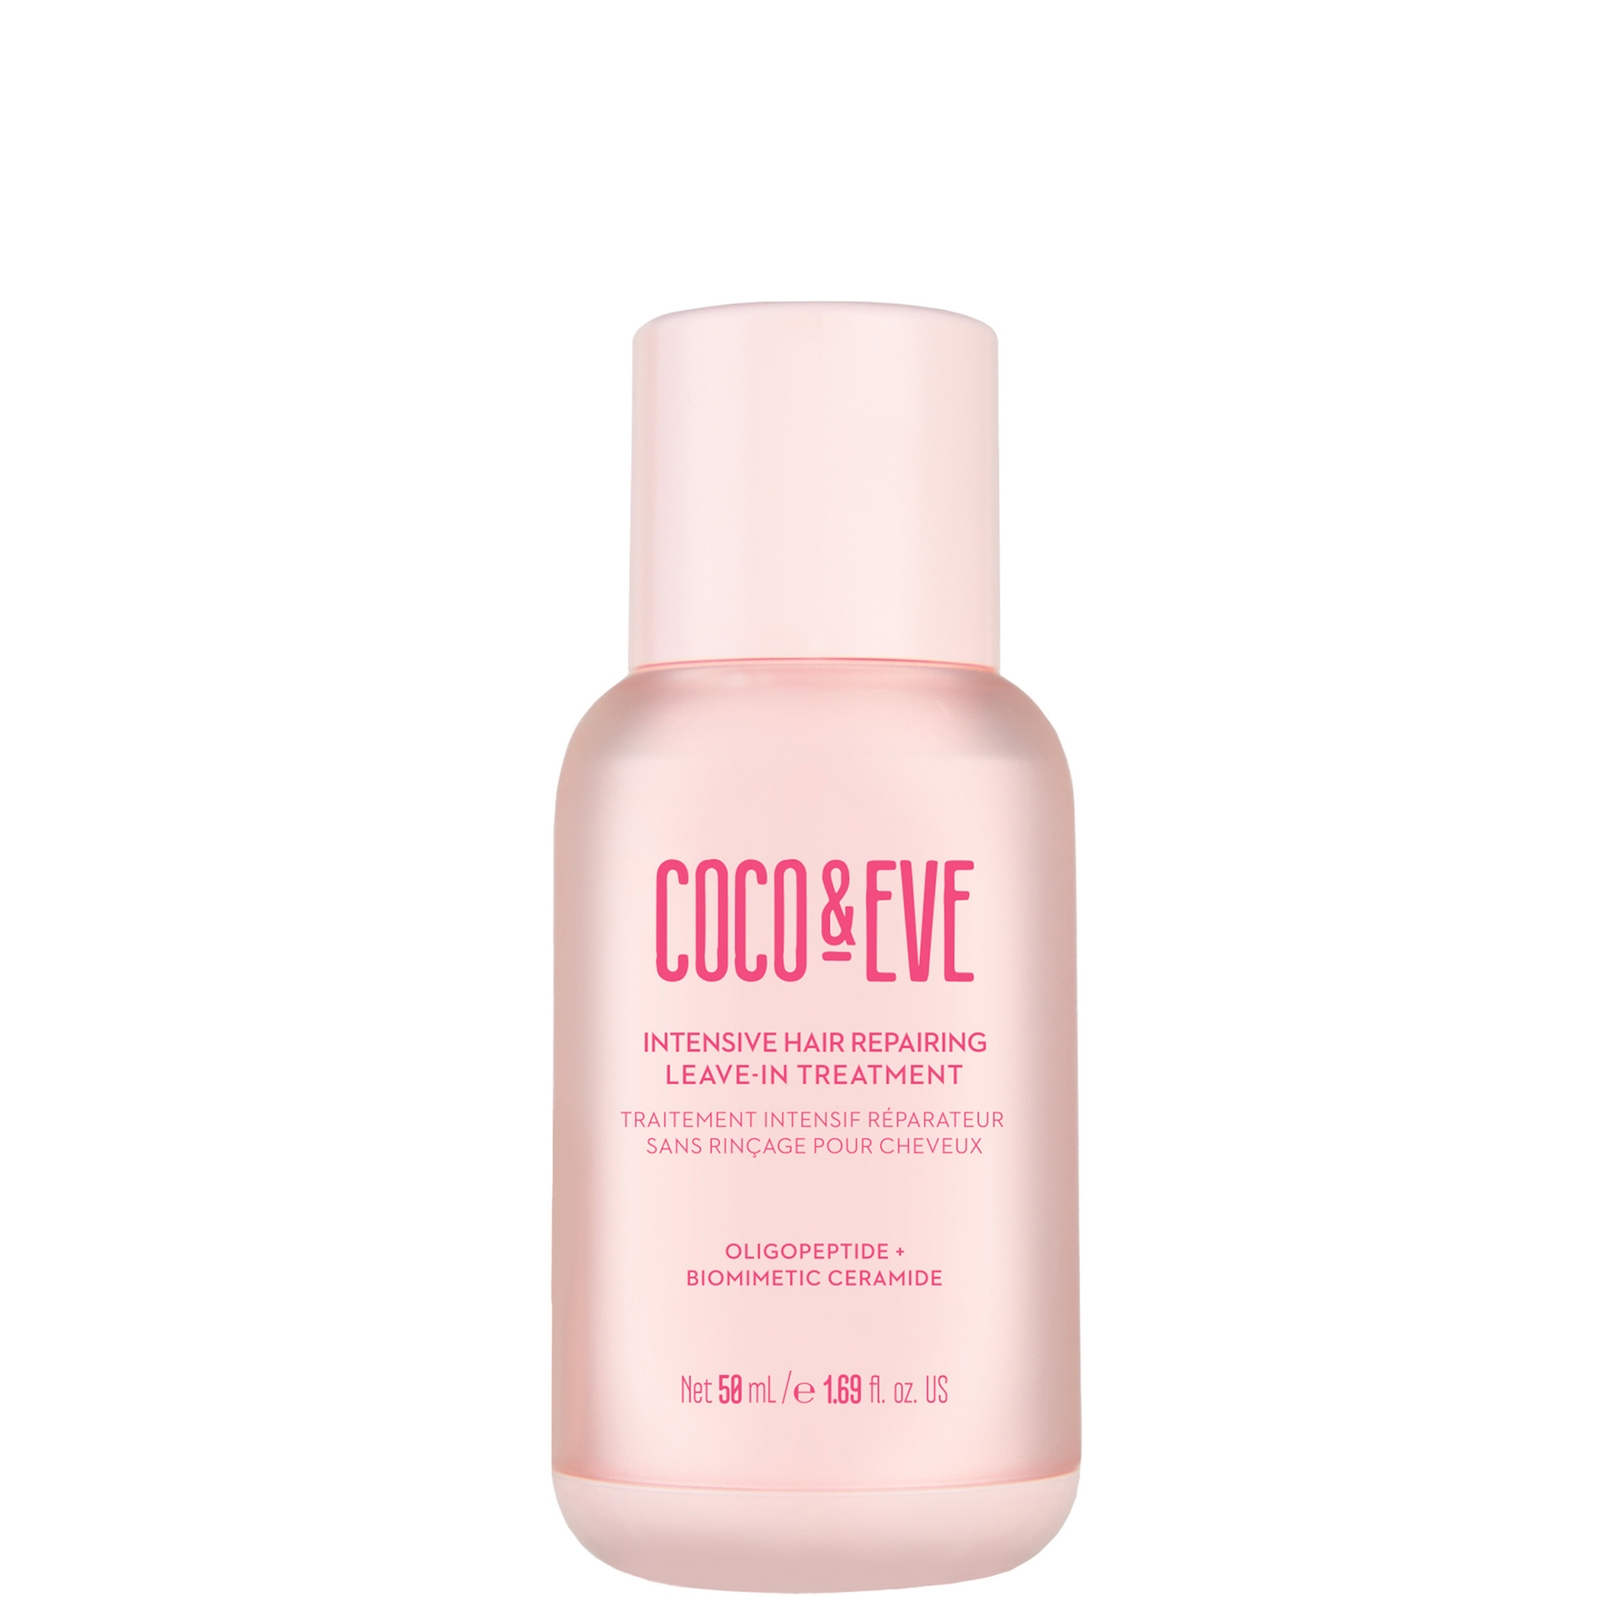 Coco & Eve Intensive Hair Repairing Leave-in Treatment 50ml In White